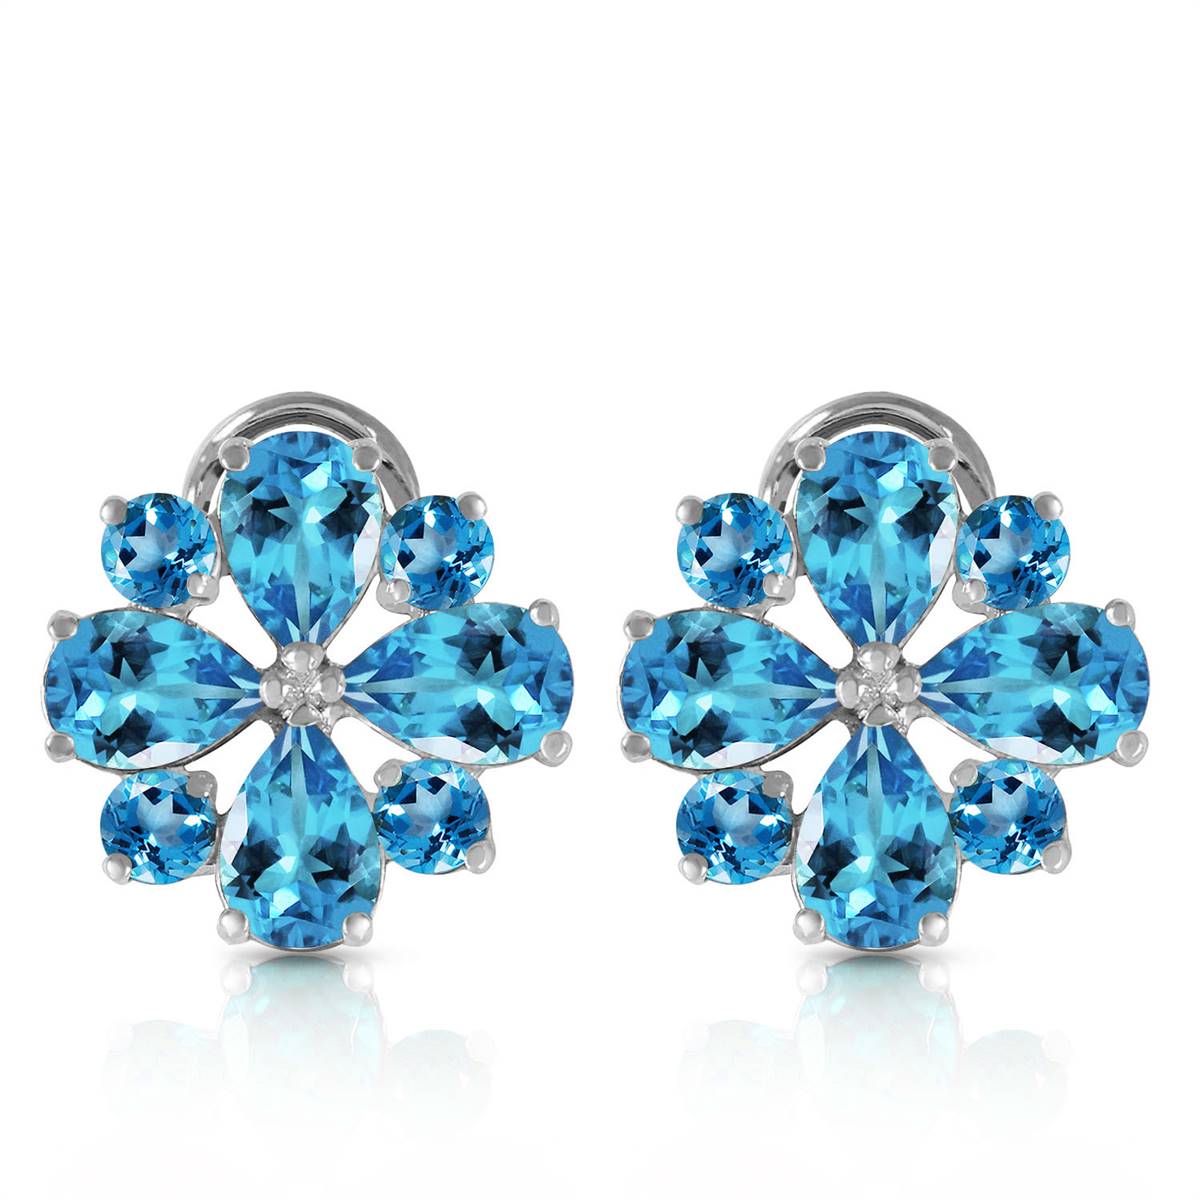 4.85 Carat 14K Solid White Gold Renowned Blue Topaz Earrings